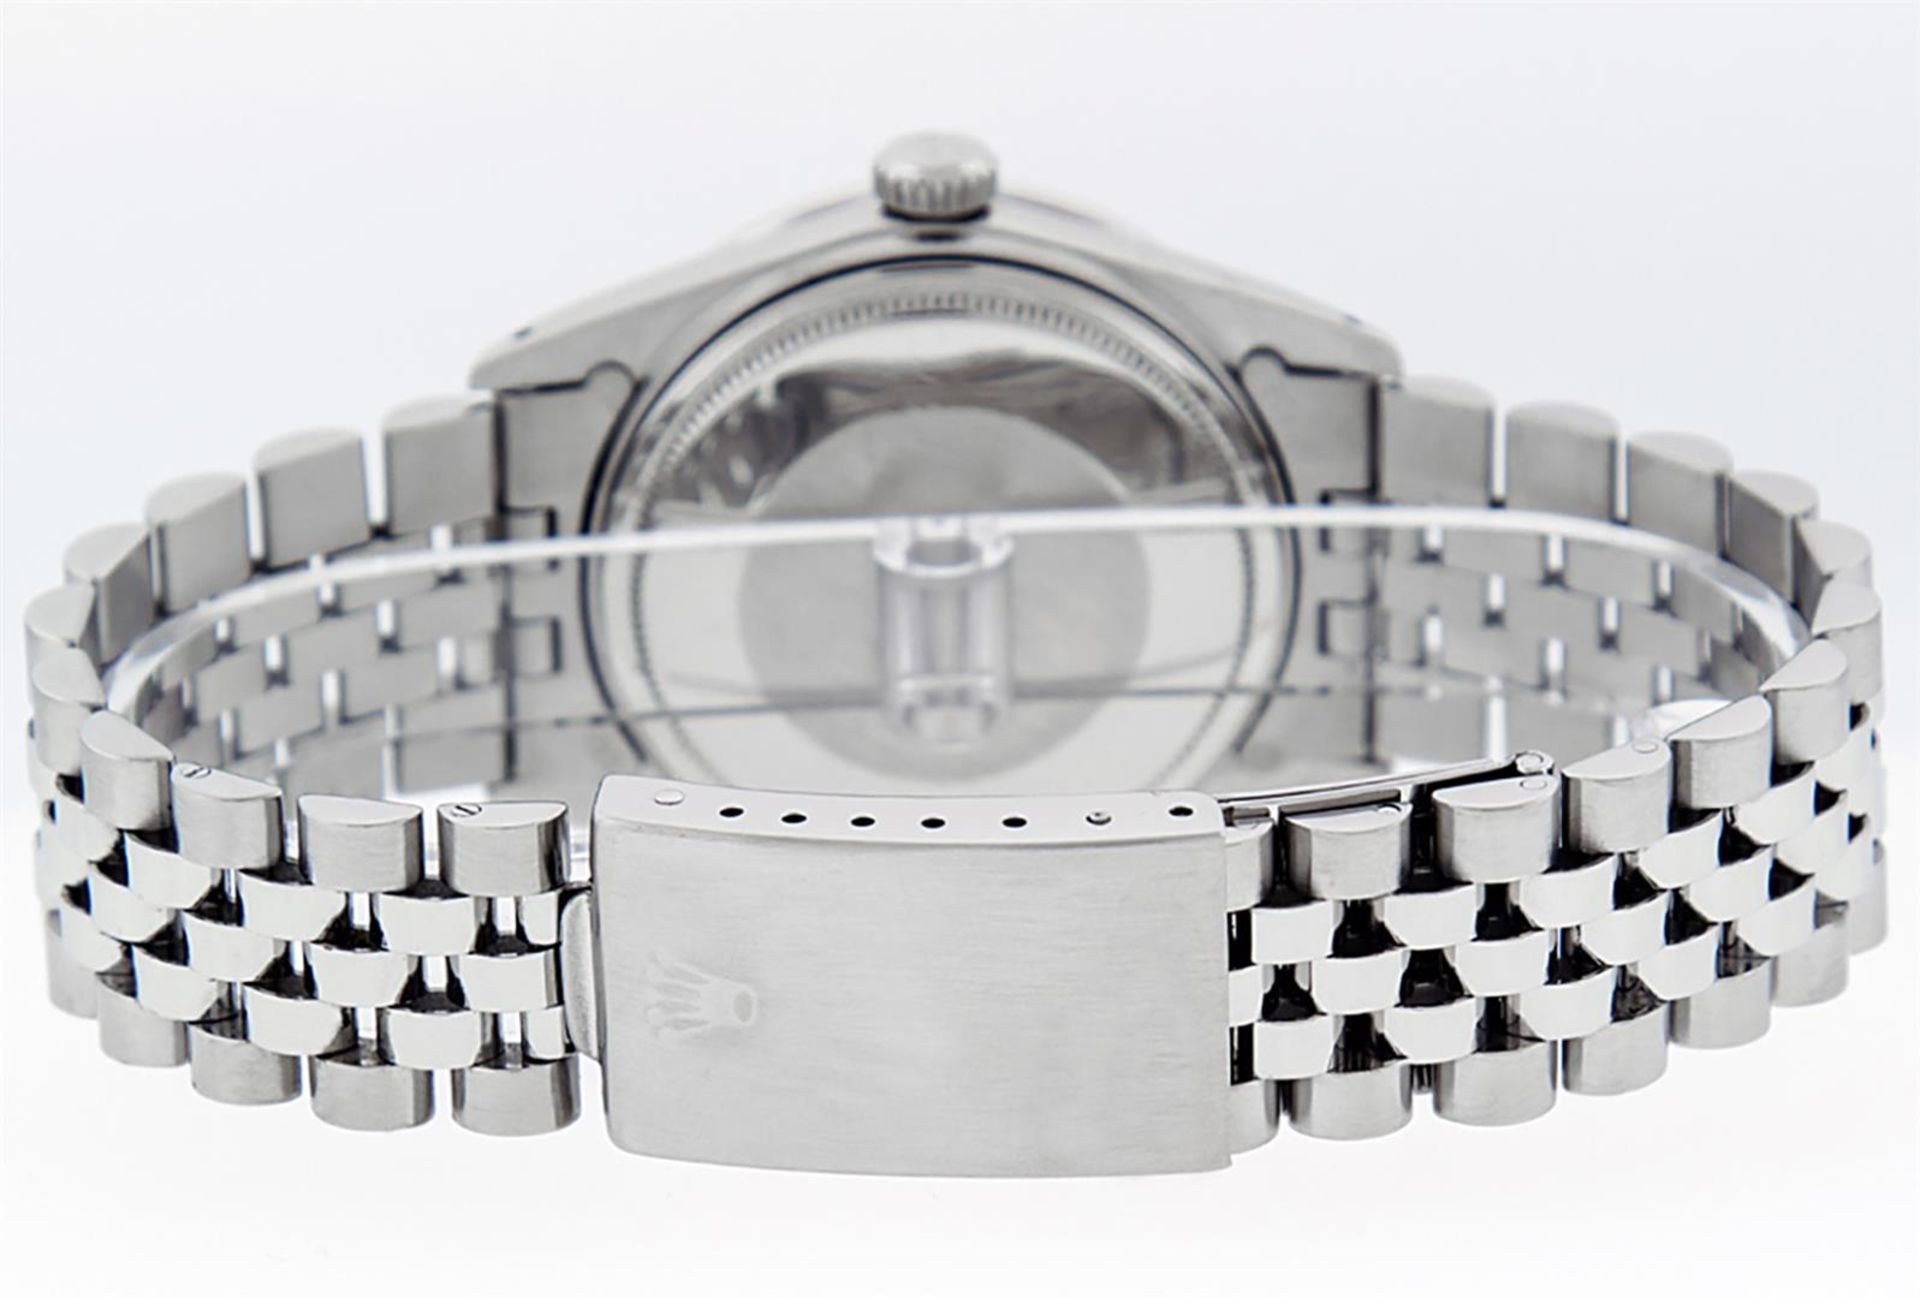 Rolex Mens Datejust 36 Stainless Steel Silver Diamond Oyster Datejust Wristwatch - Image 6 of 9